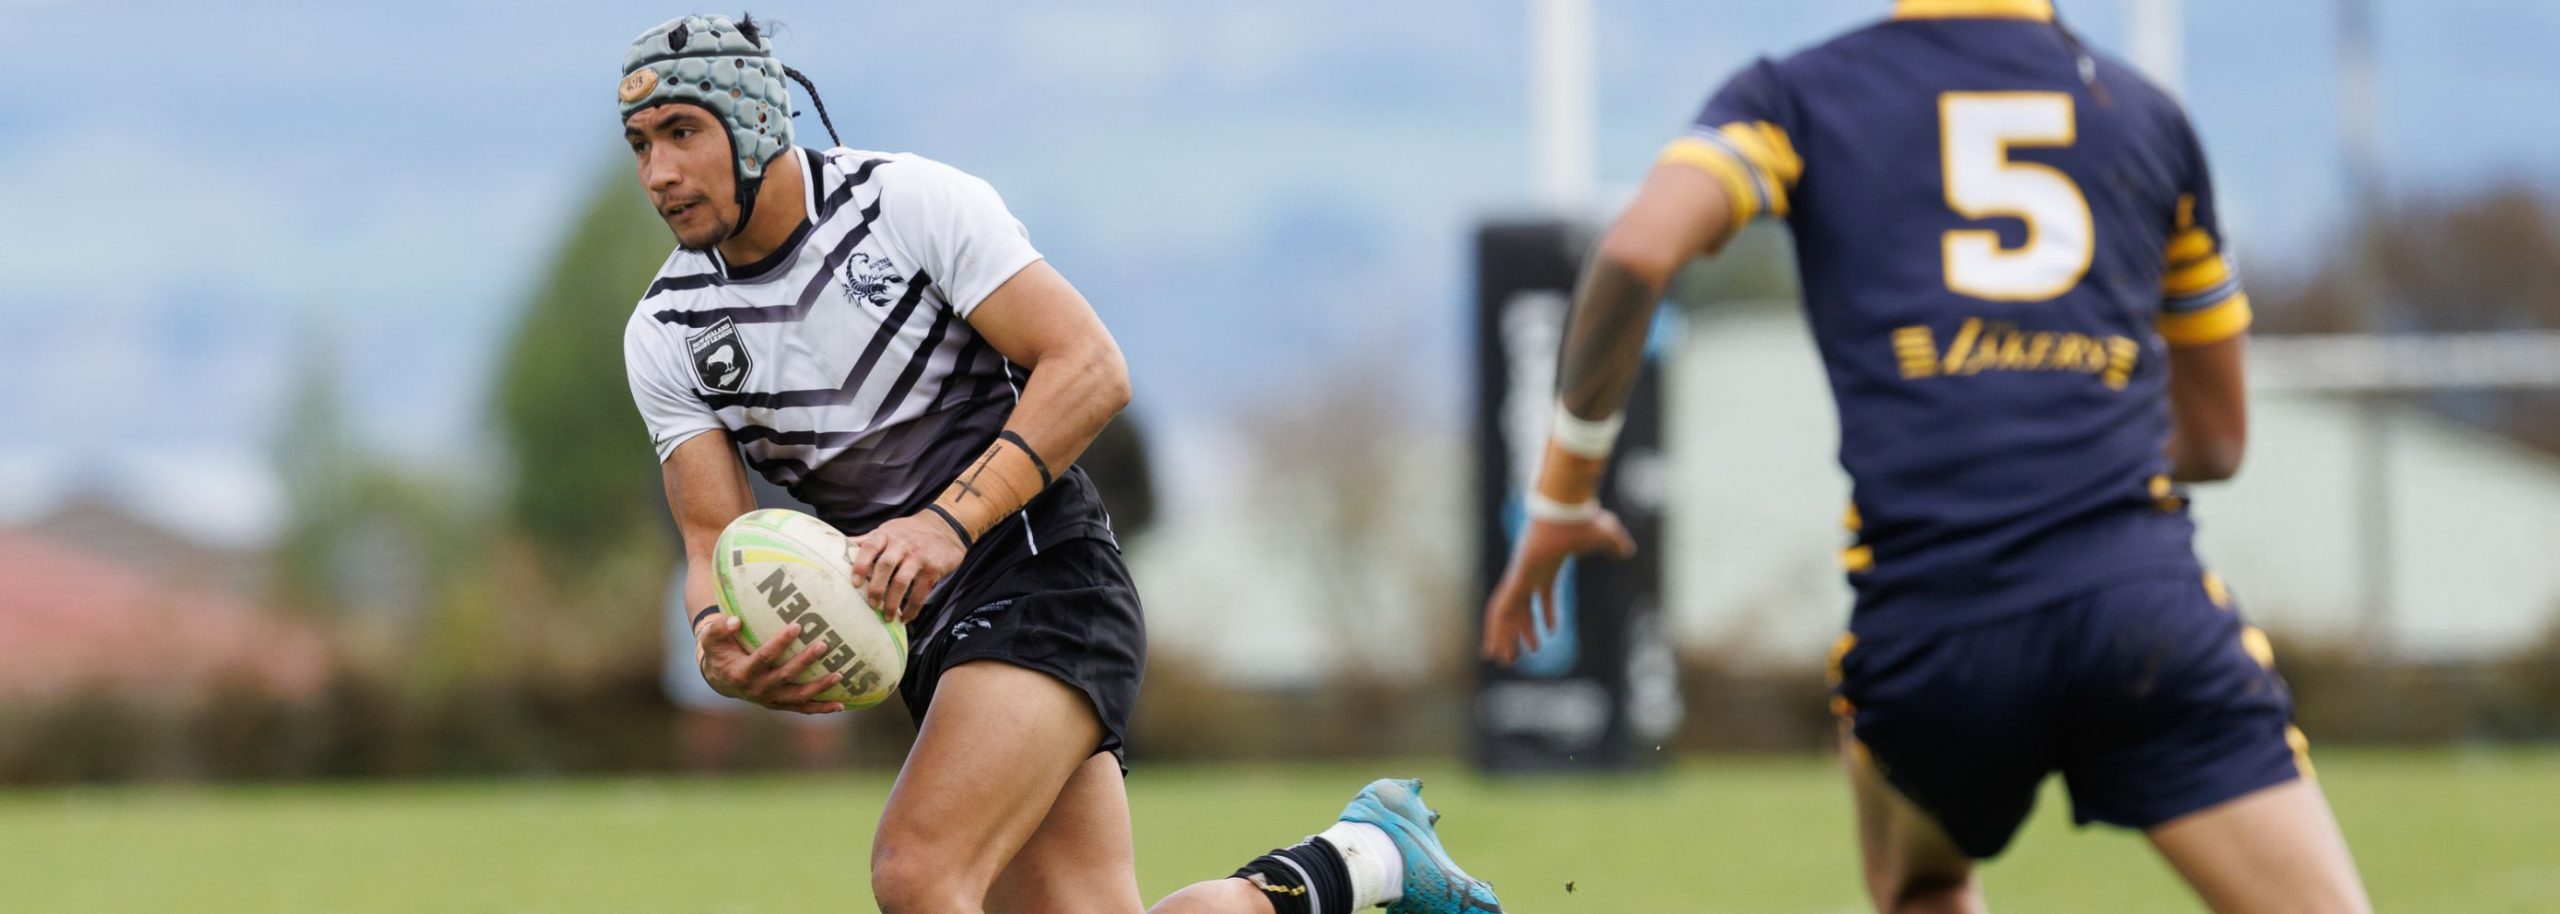 South Island Contenders In Both Finals, Facing Waikato and Reigning Champs Counties Manukau